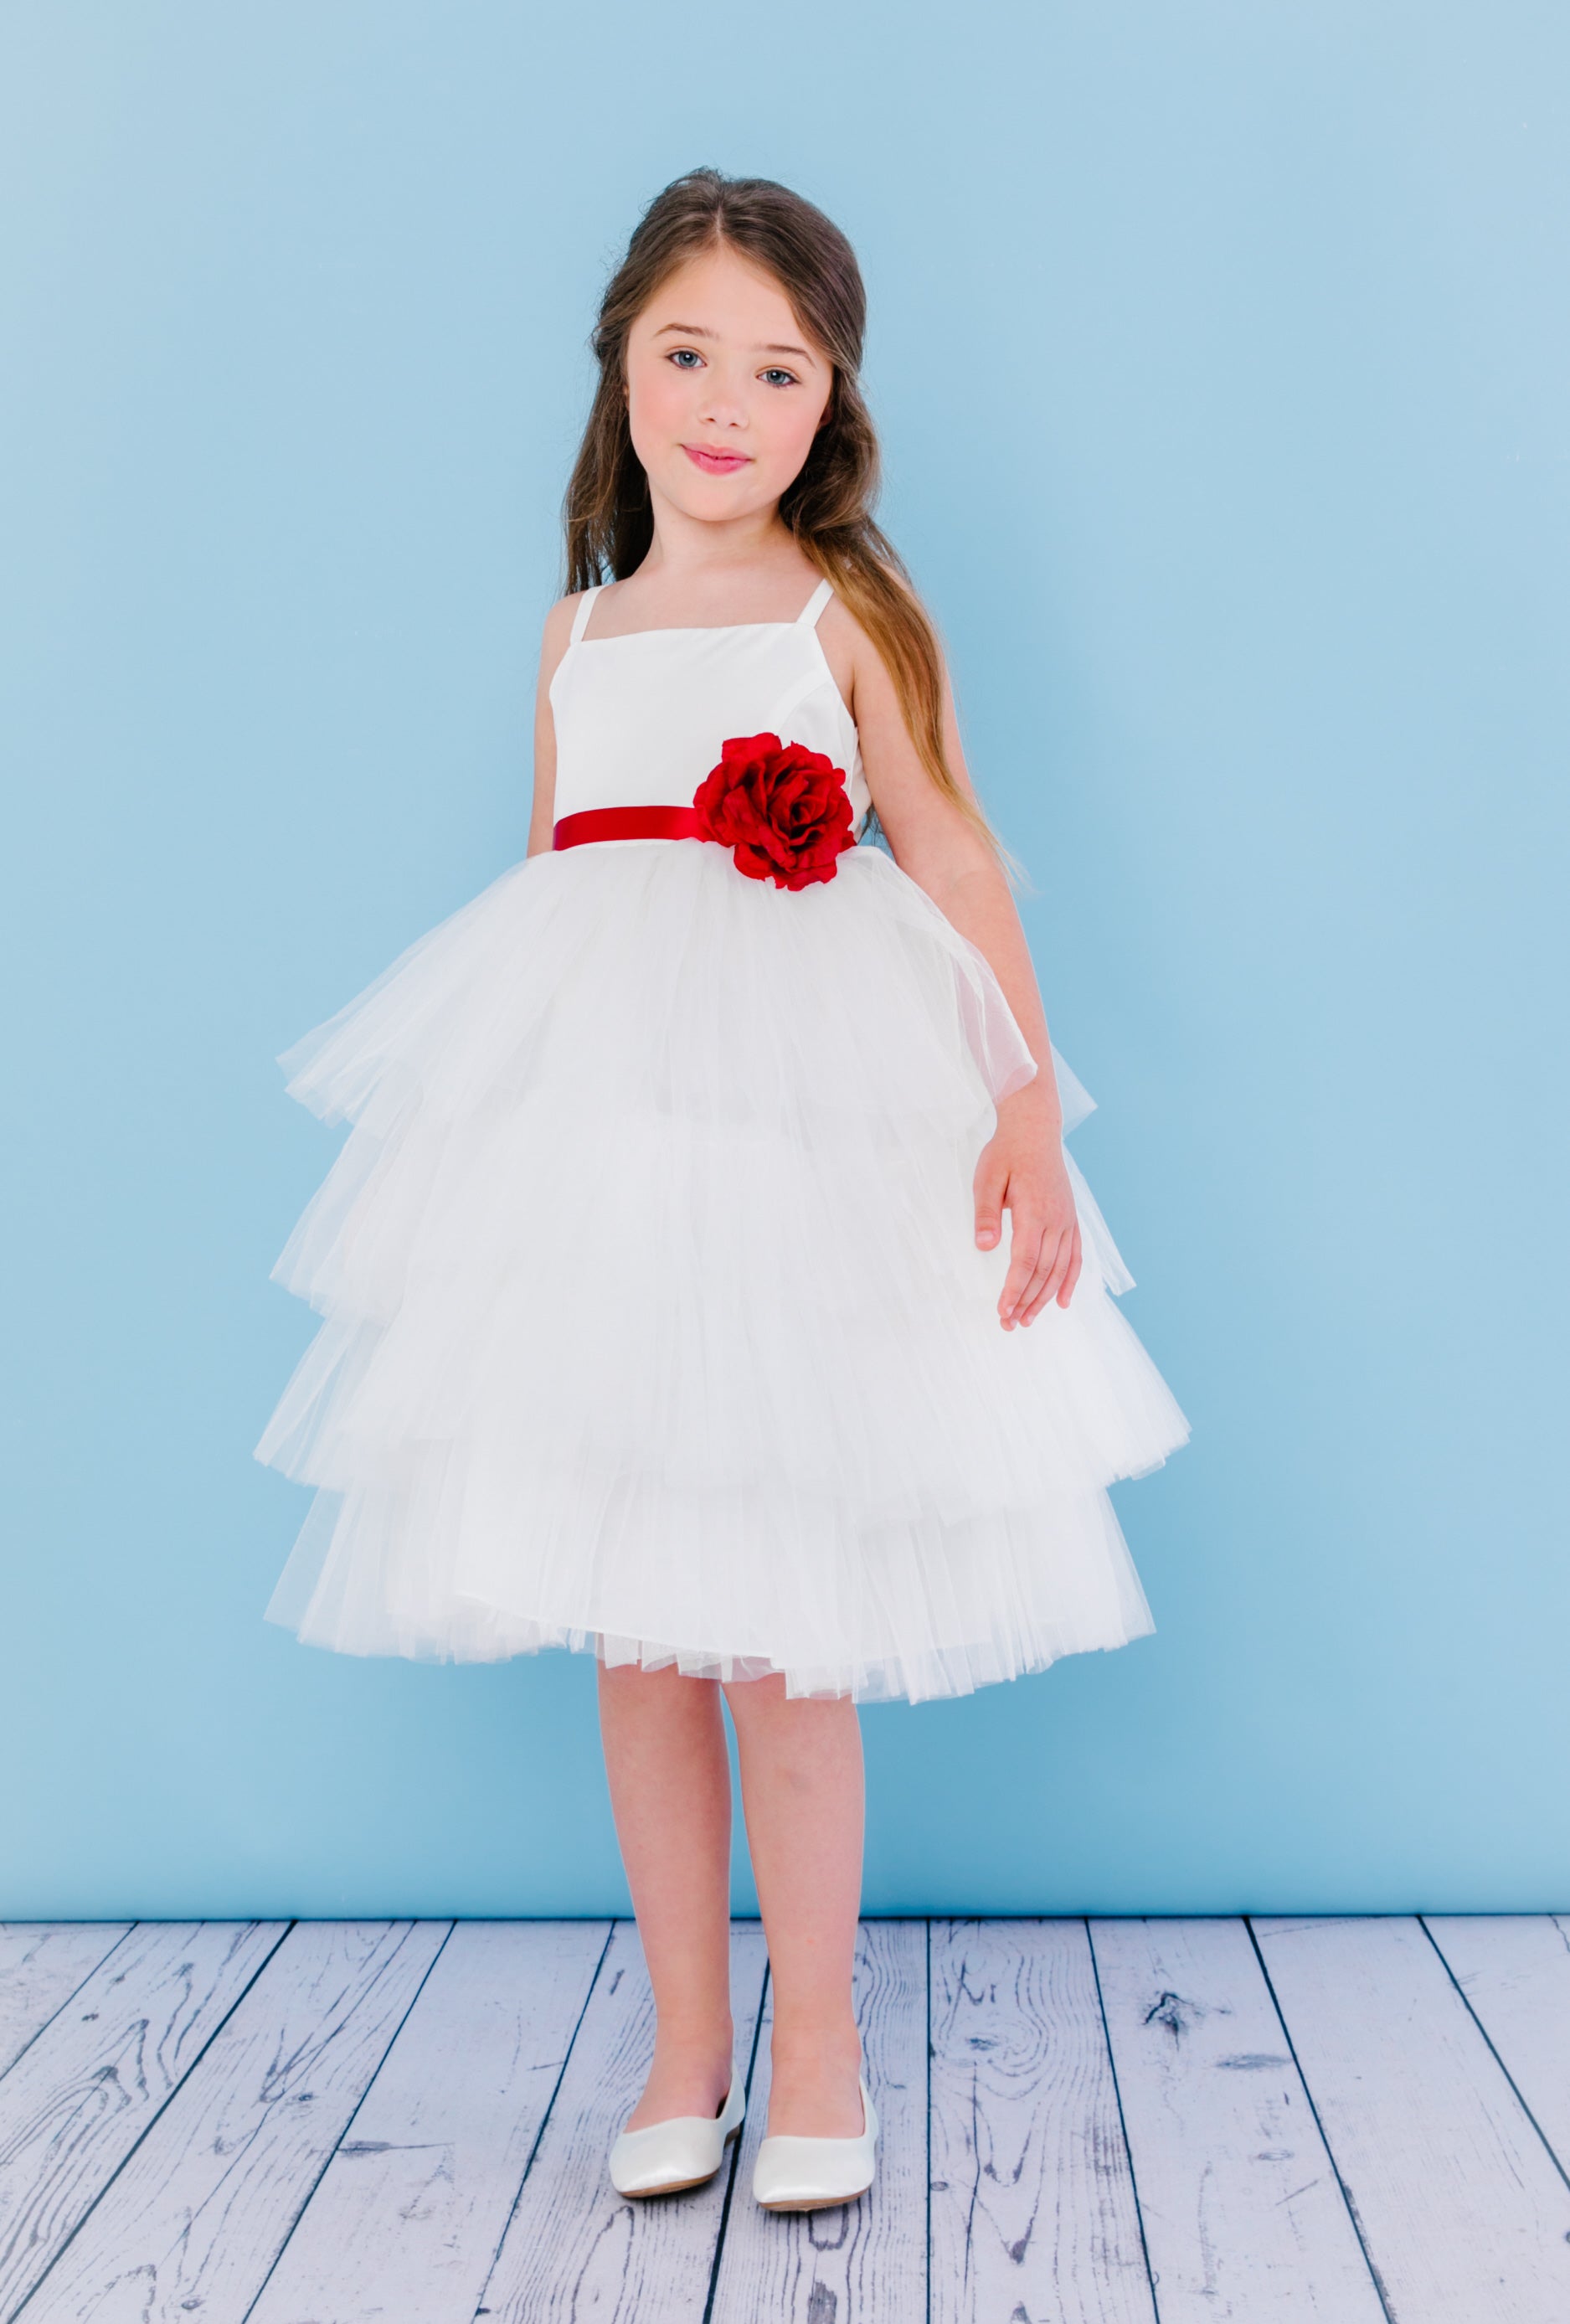 Rosebud Fashions Style 5117 is a spaghetti strap T-length dress. The bodice is satin with a 4 tiered tulle skirt that is accented with a ribbon that ties in the back with a flower. Satin buttons cover the zipper. Great flower girl dress & Formal Party Gown!  Available Sizes: 2,4,6,8,10,12  Available Colors: White, Ivory  Fabric is Satin and Tulle